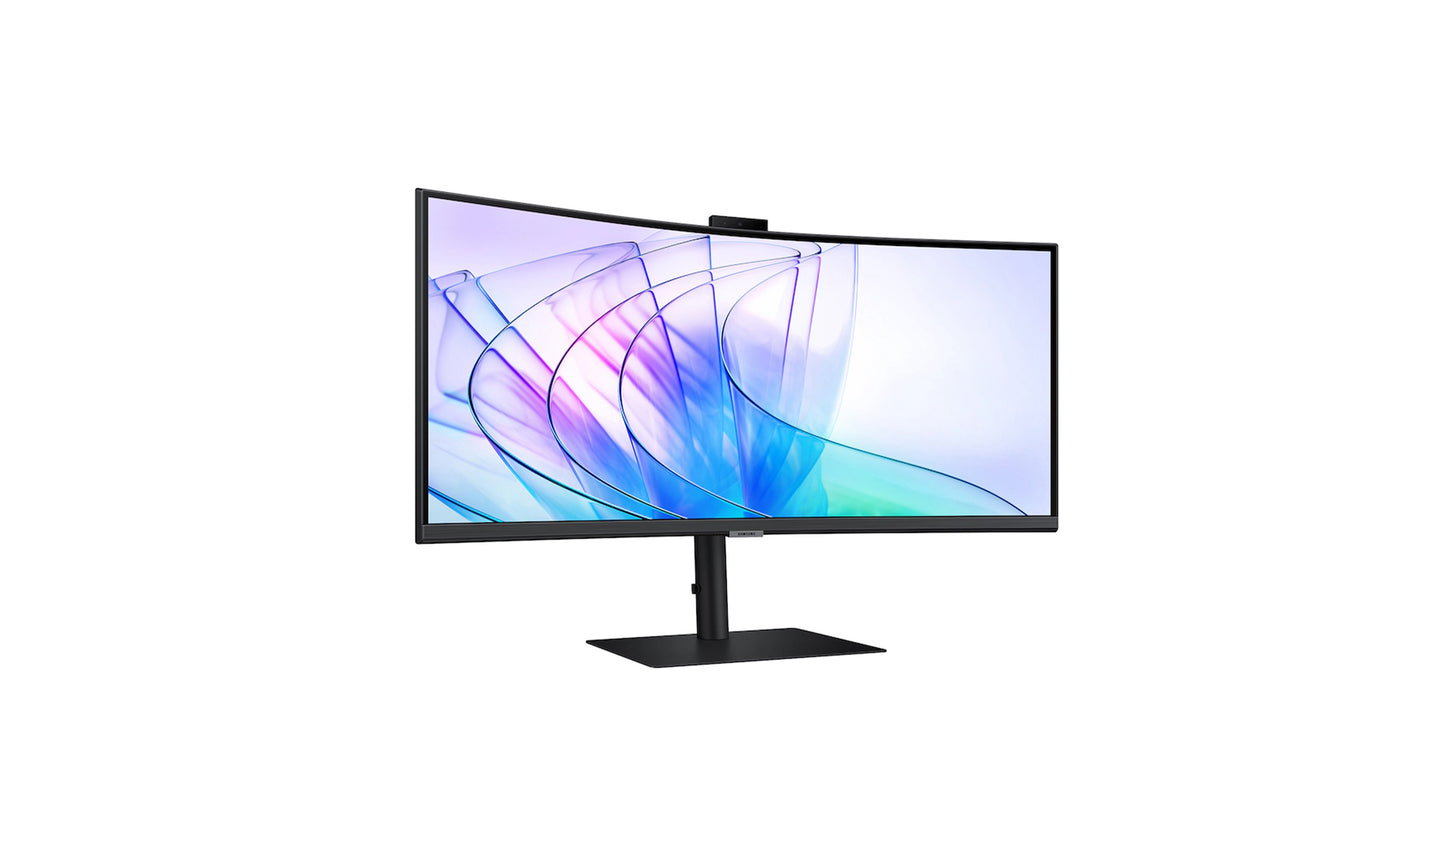 34" ViewFinity S65VC Ultra-WQHD 100Hz AMD FreeSync™ HDR10 Curved Monitor with USB-C, Speakers and Built-in Camera